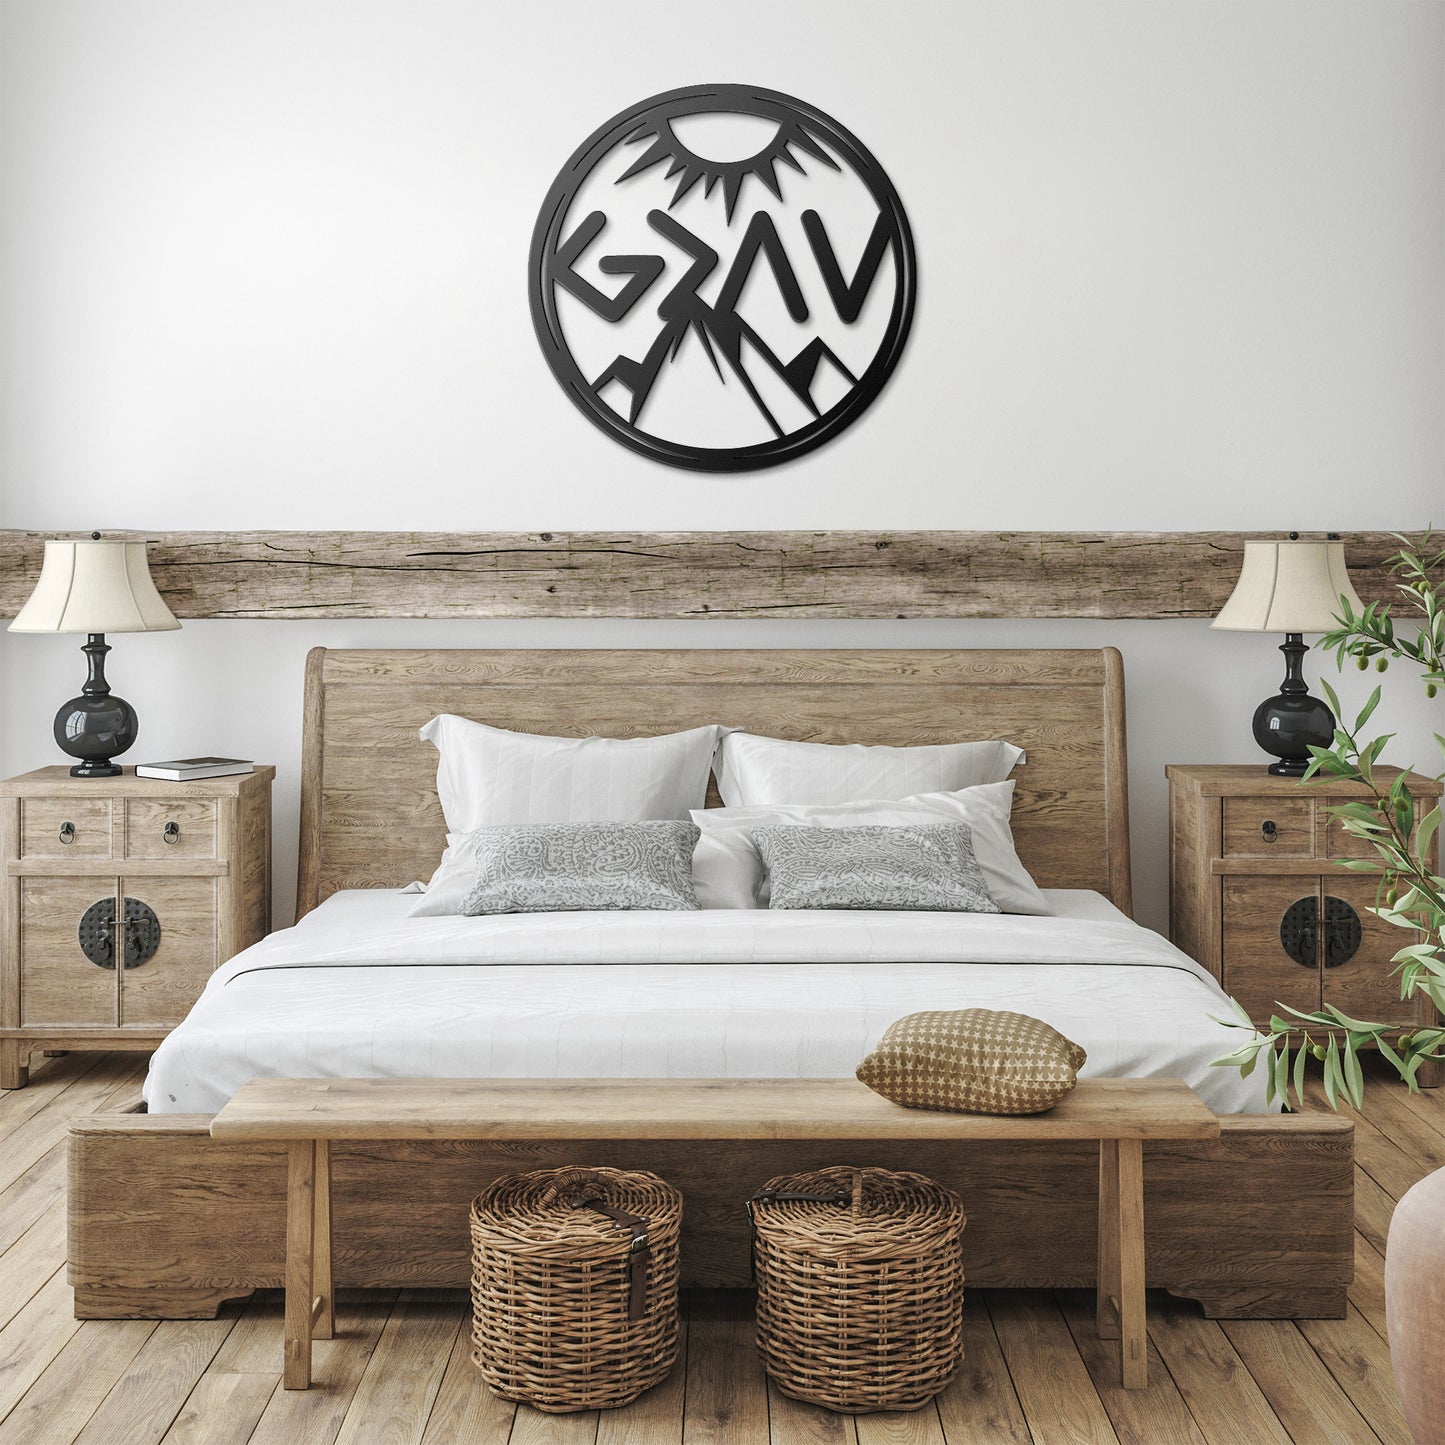 God is Greater Sign - Greek Letters - Inspirational Metal Wall Art - Faith Home Decor